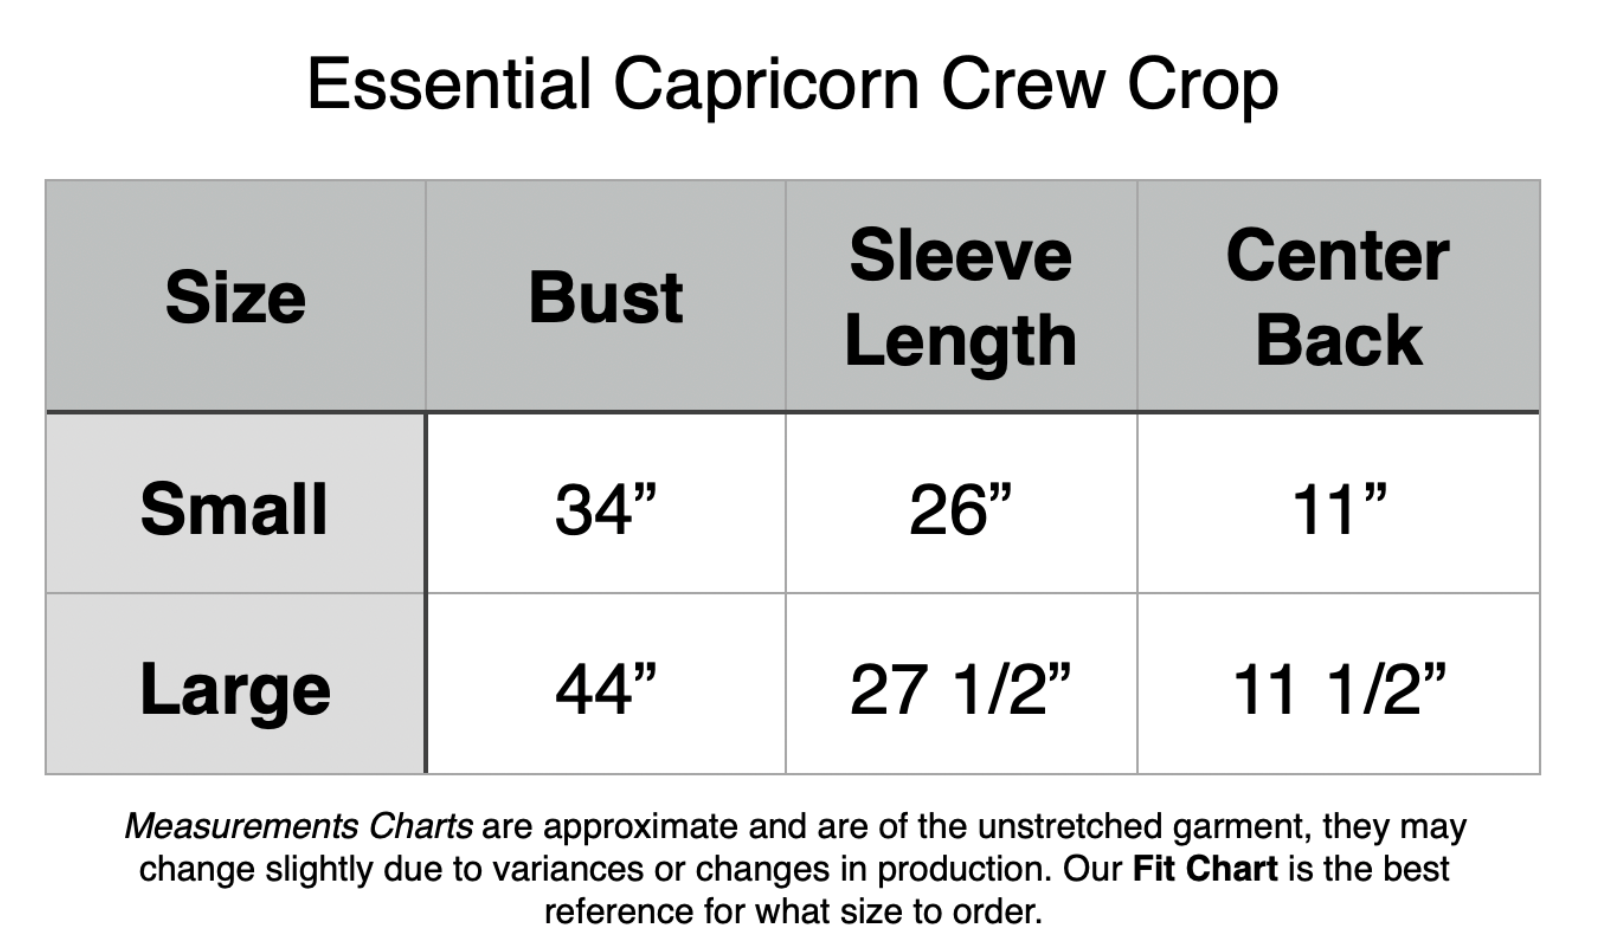 Essential Capricorn Crew Crop: Small - 34” Bust,, 26” Sleeve Length, 11” Center Back. Large - 44” Bust, 27.5” Sleeve, 11.5” Center Back.